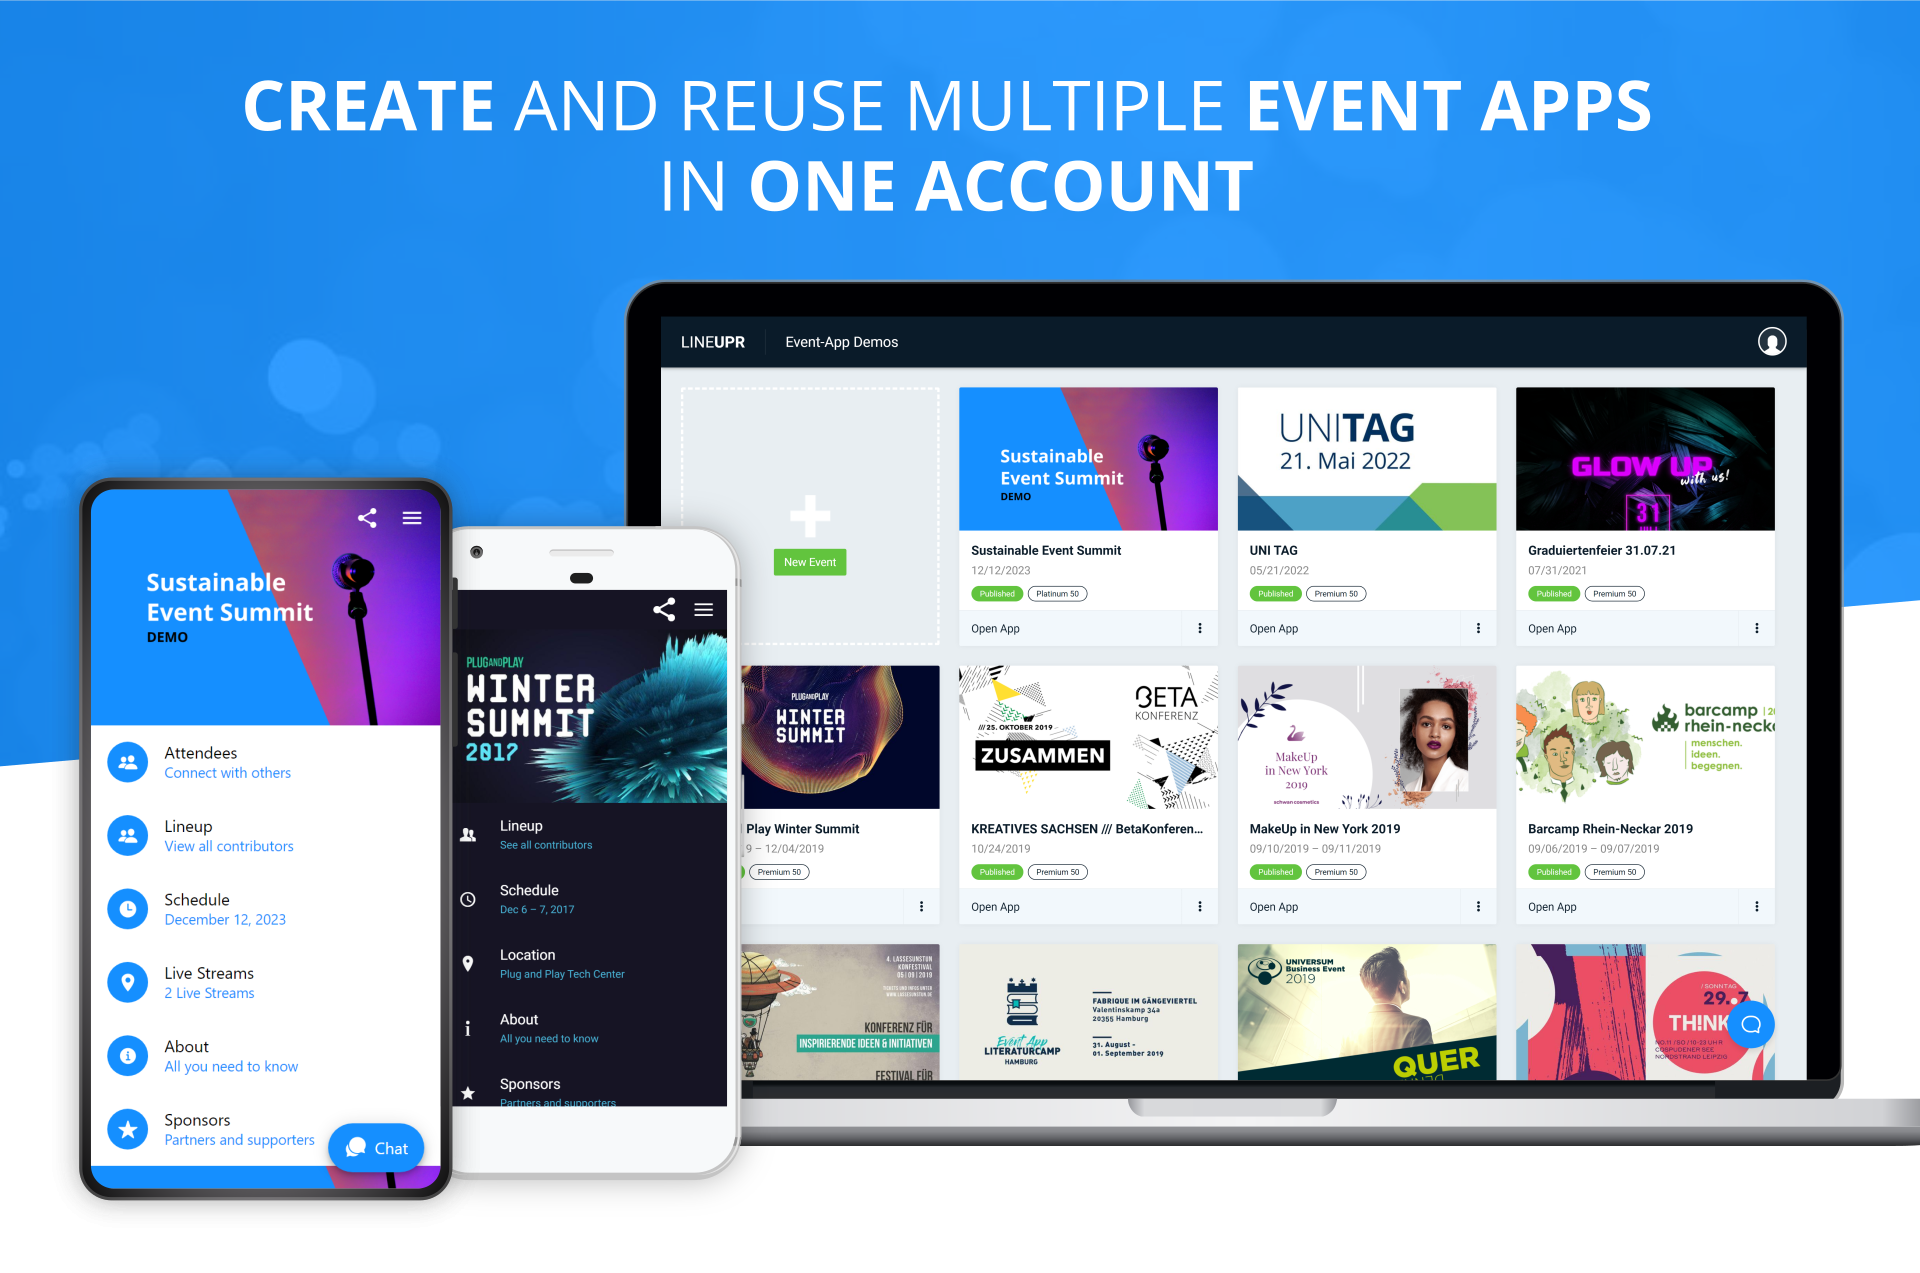 With LineUpr you can create, update and reuse as many event apps as you wish in one account. LineUpr is the perfect solution if you need to handle many events that require an event app.